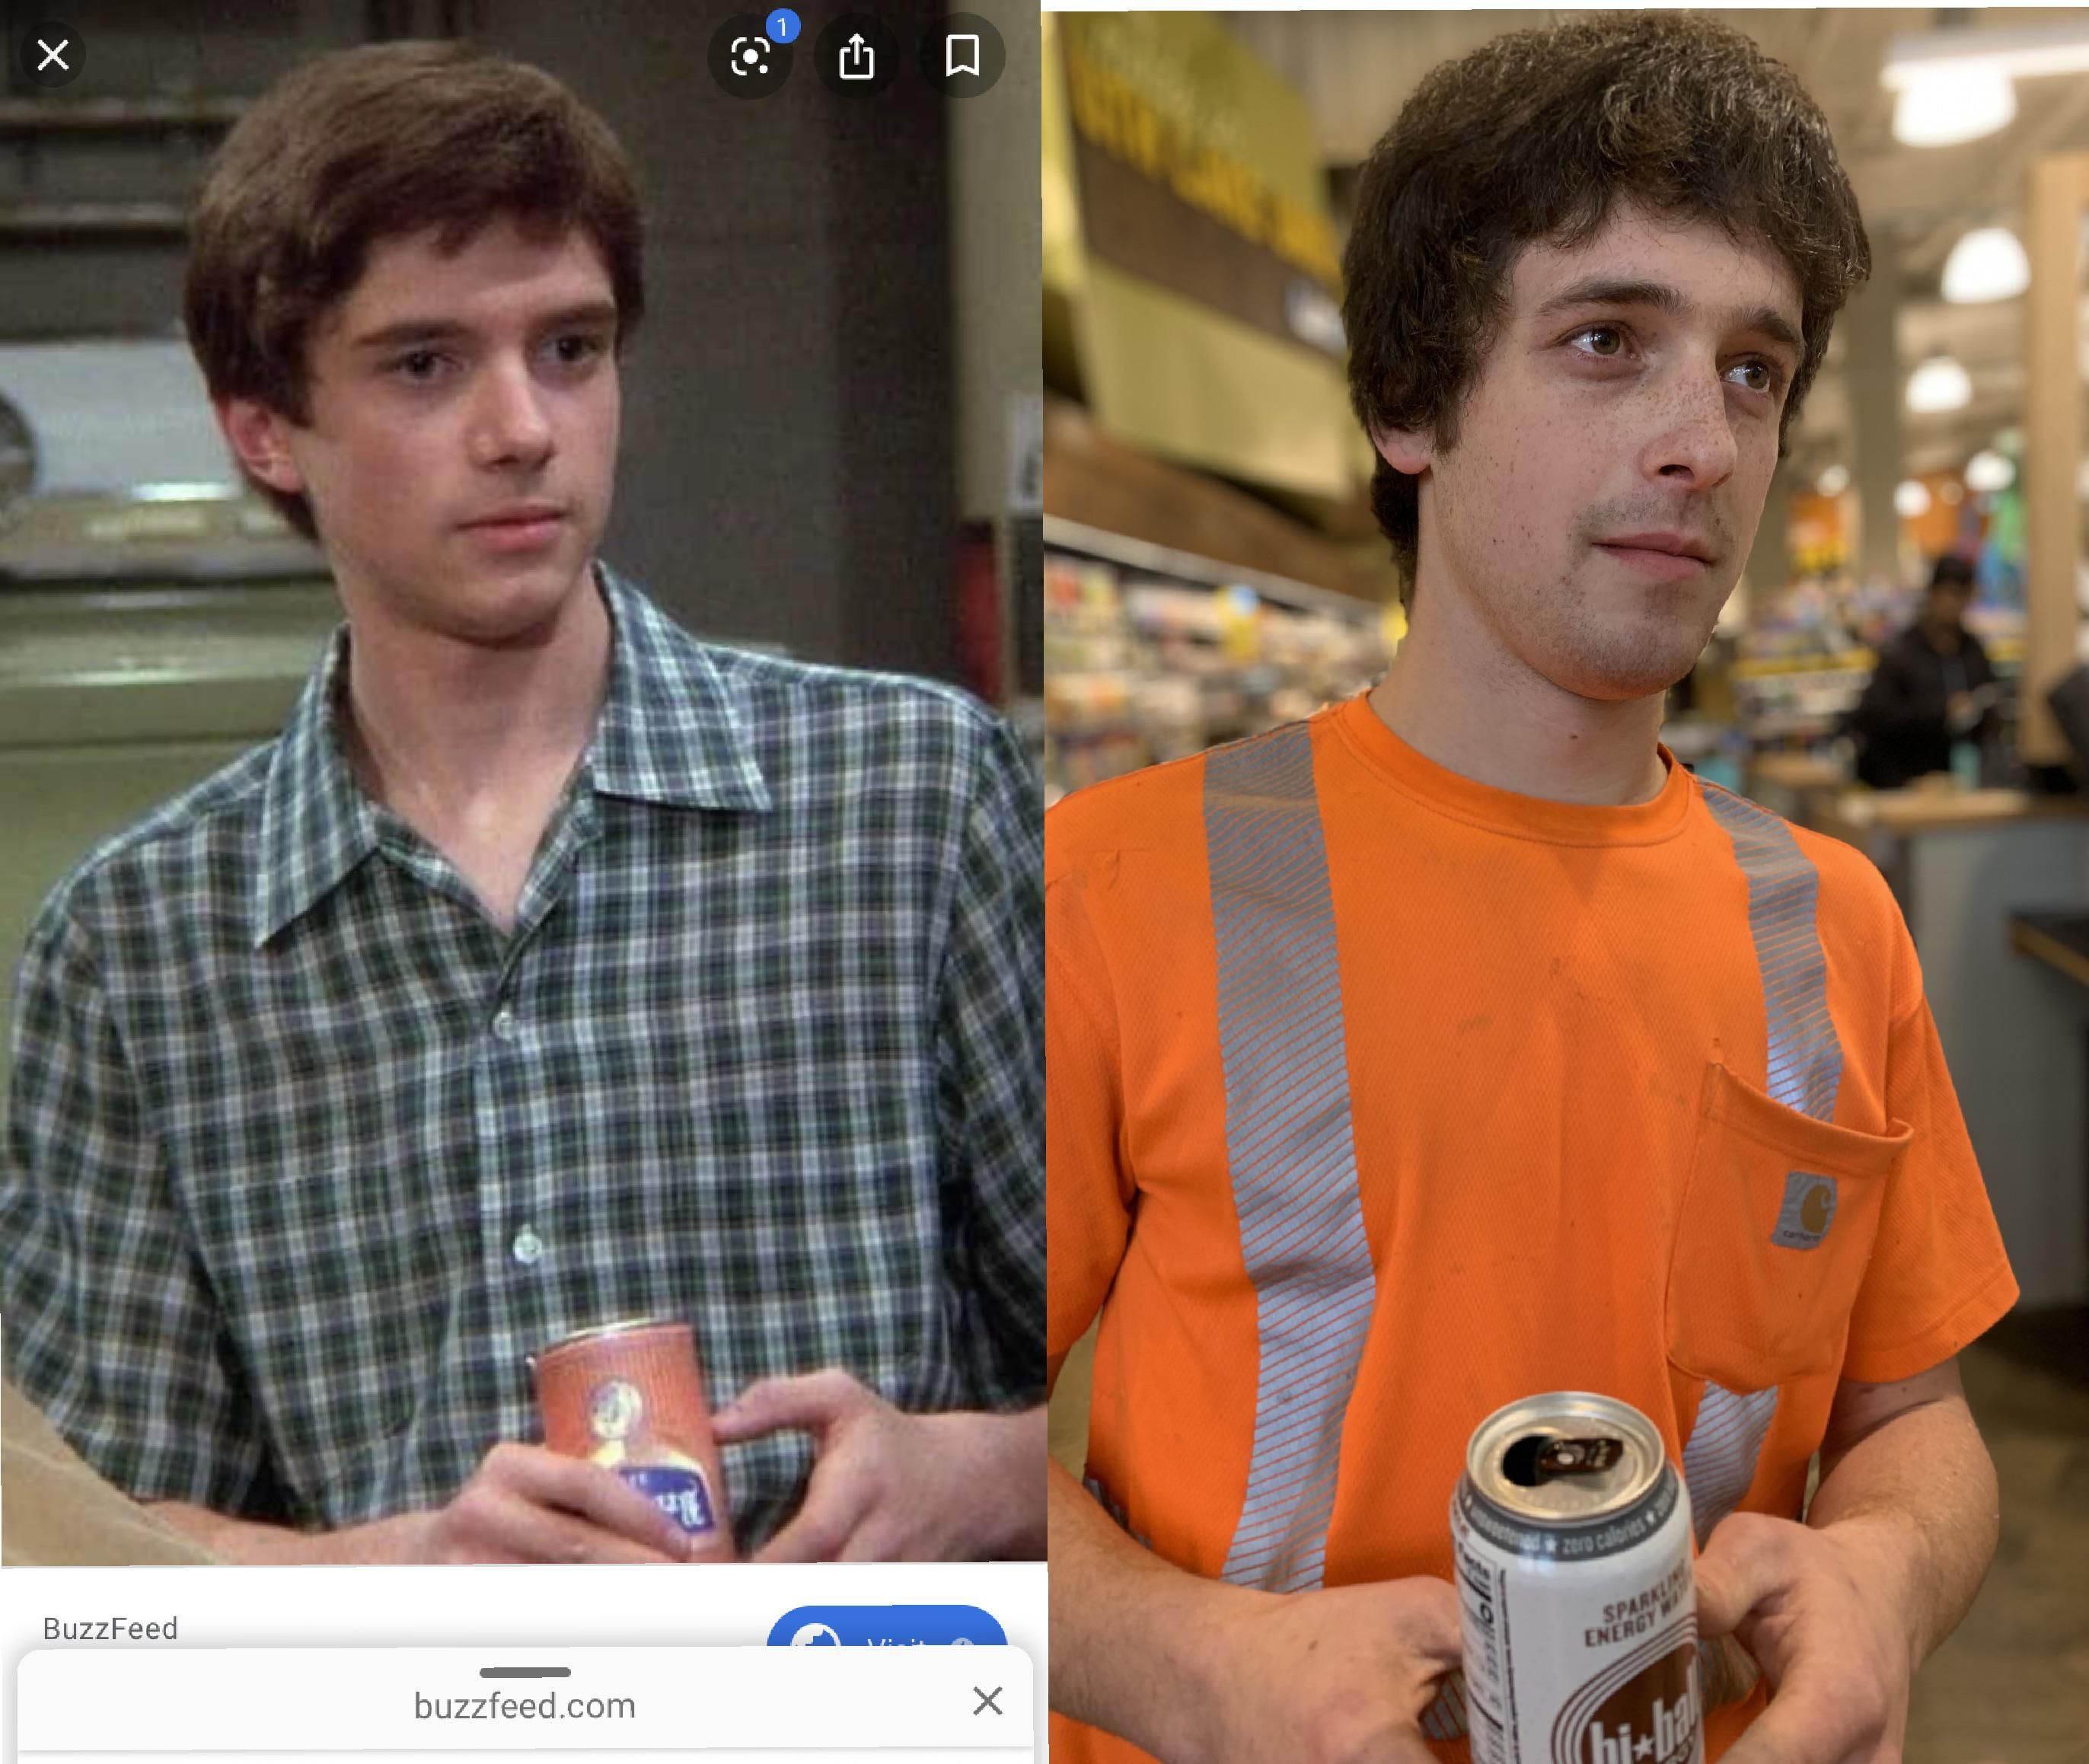 My coworker shaved his beard over the weekend. I can’t get past this comparison.